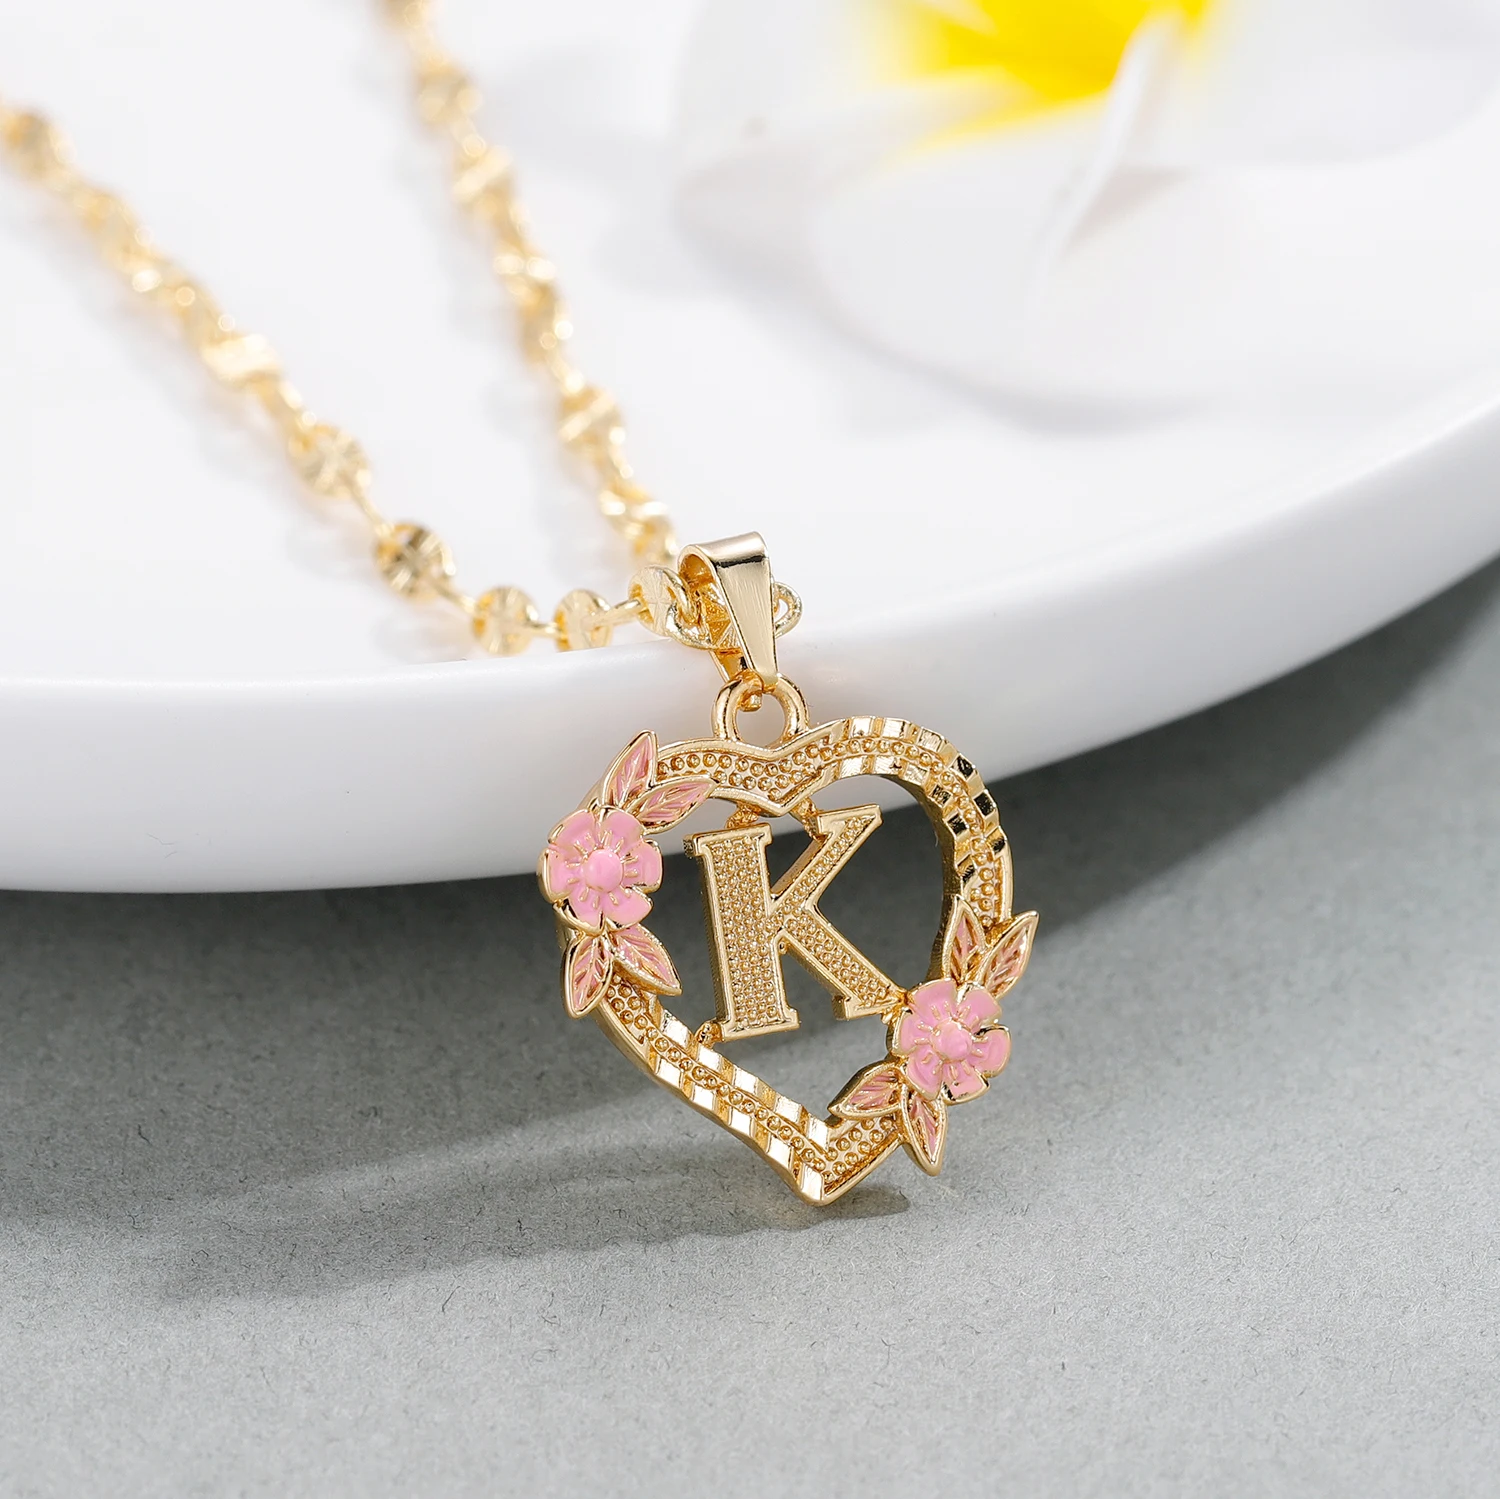 

18K gold-plated Heart initials Pendant Necklace A-Z Alphabet letters Necklace / Name Initial necklace for Women/ Heart Necklace